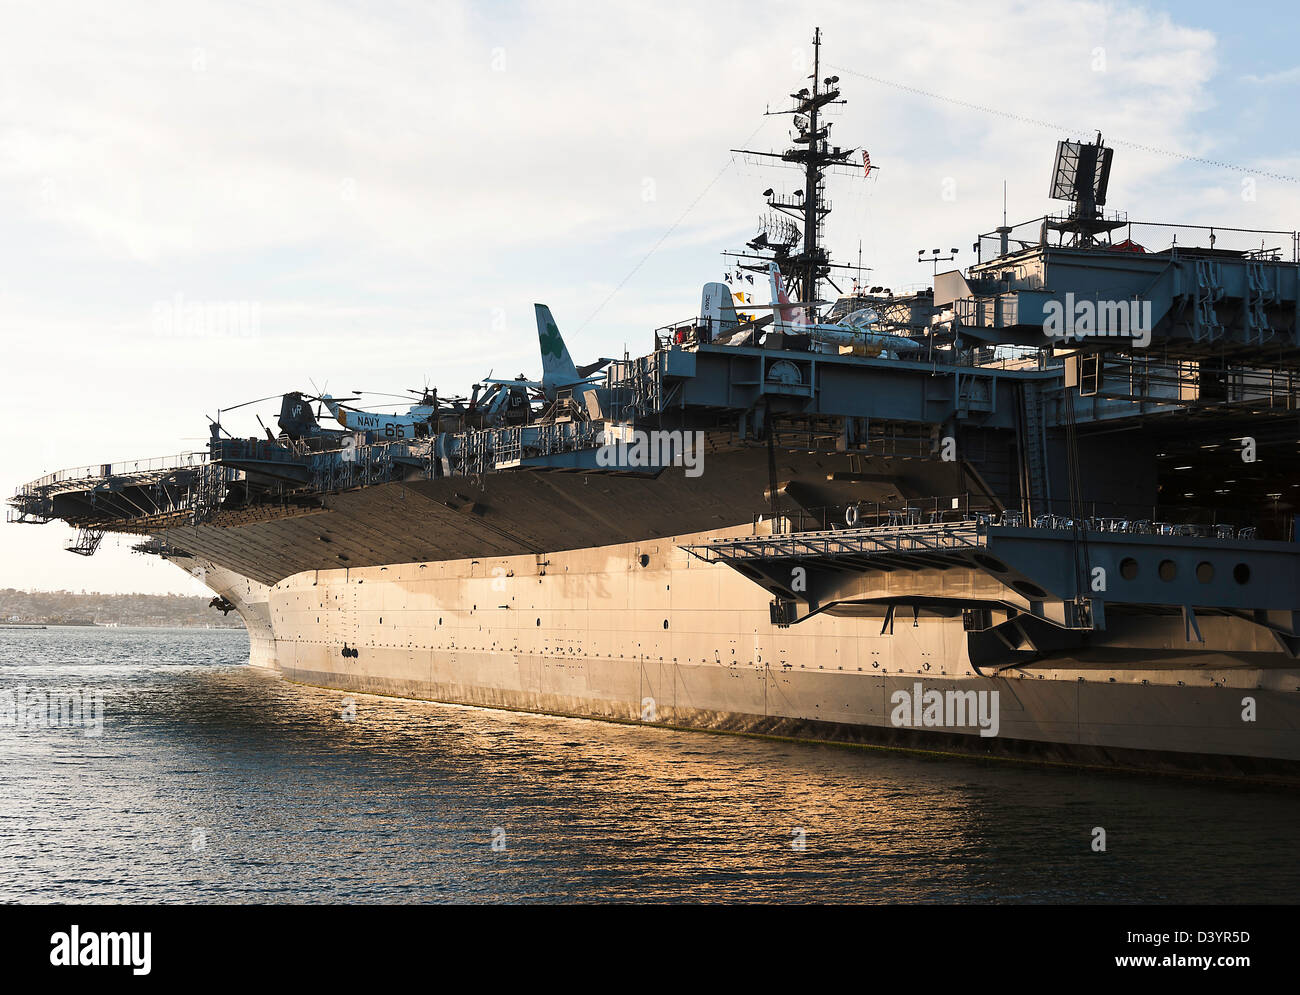 The Retired United States Of America Navy Aircraft Carrier Uss Midway D3YR5D 